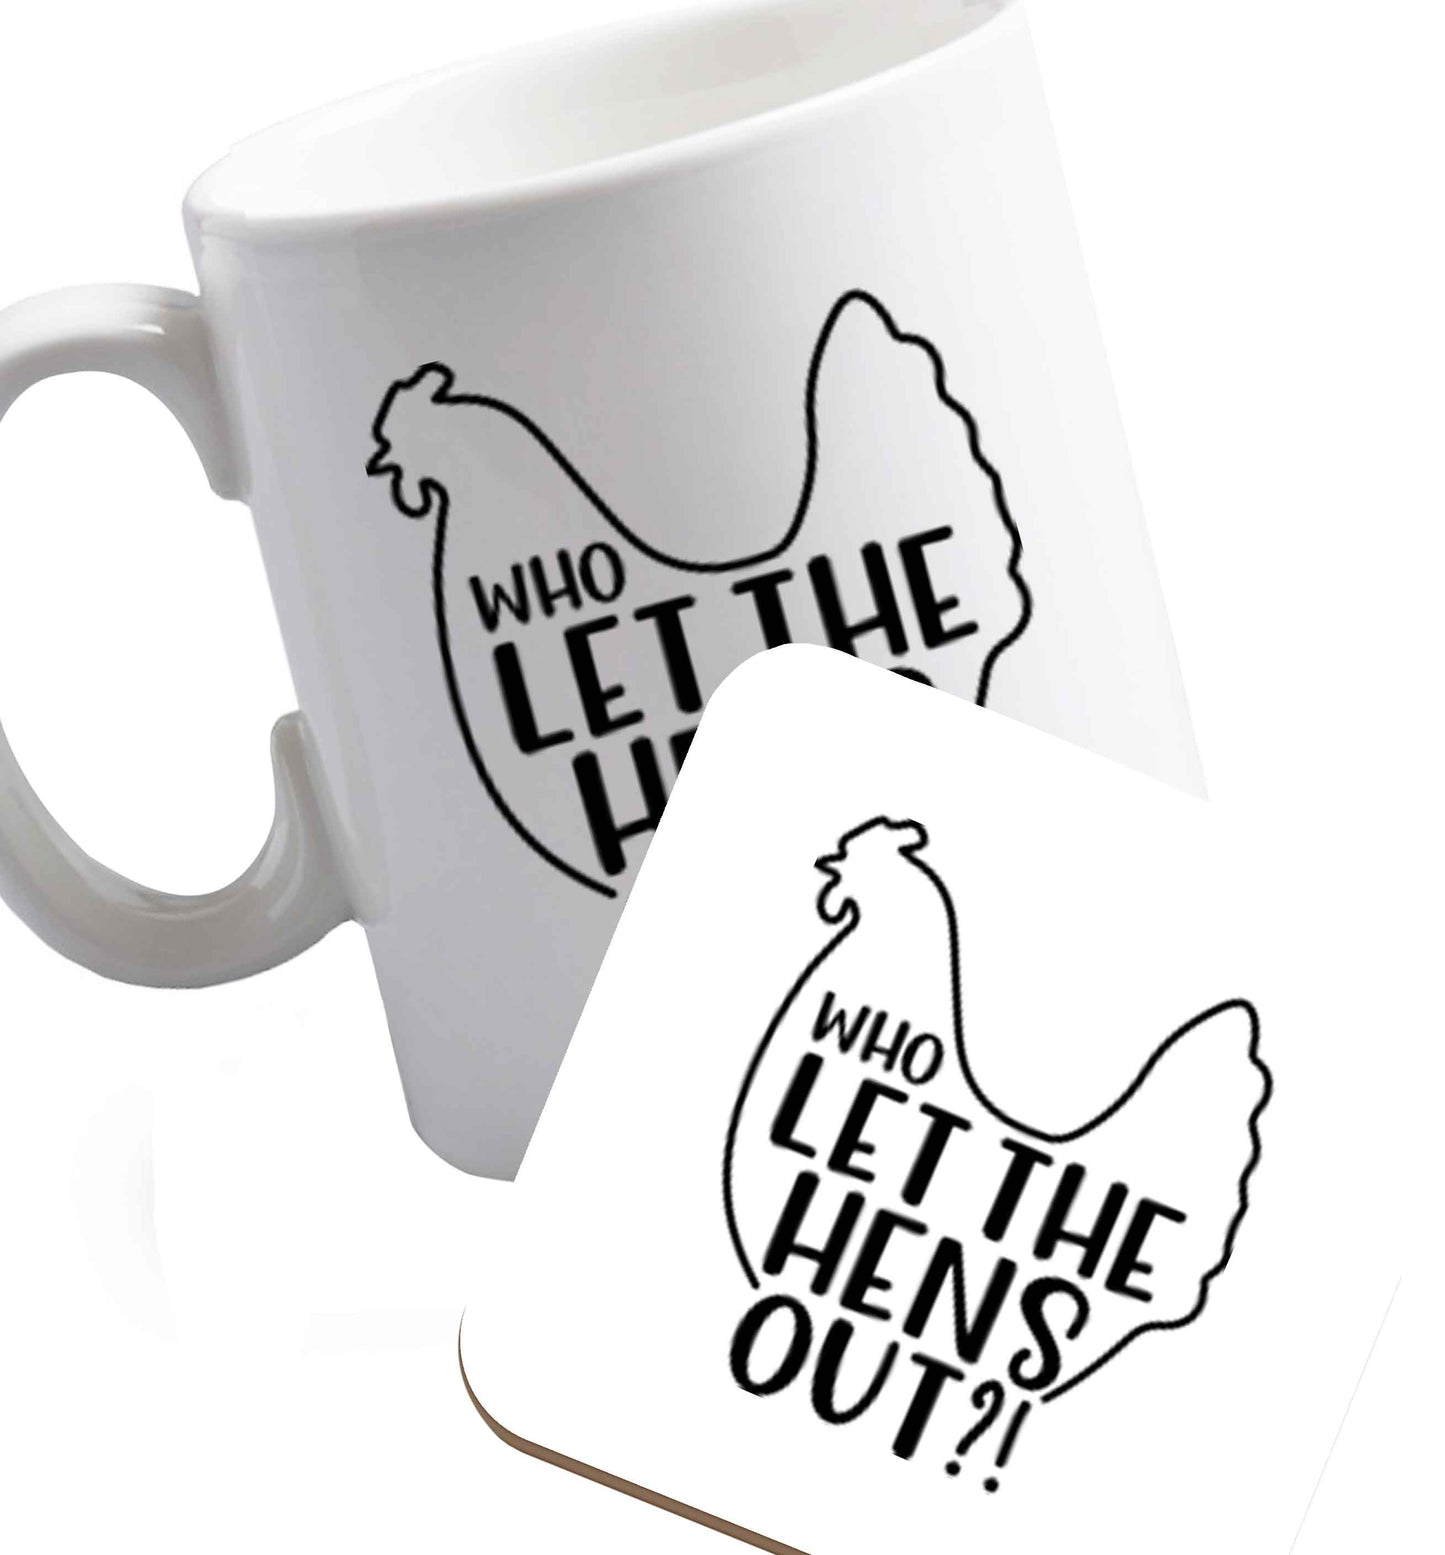 10 oz Who let the hens out   ceramic mug and coaster set right handed